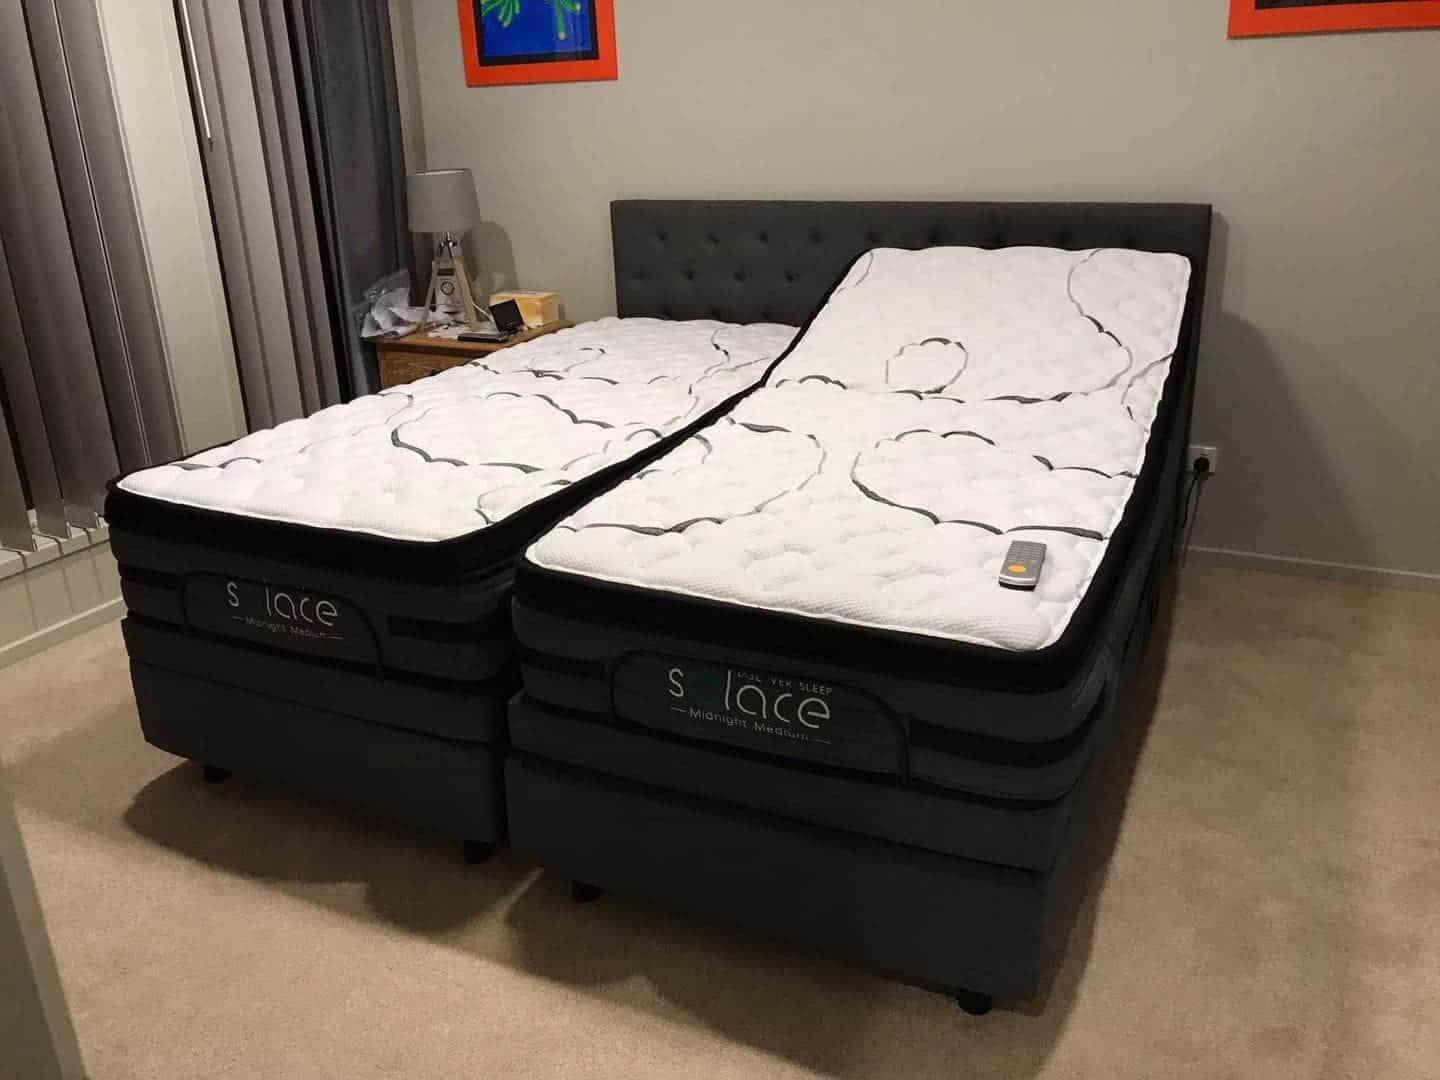 Solace Sleep adjustable bed review 4